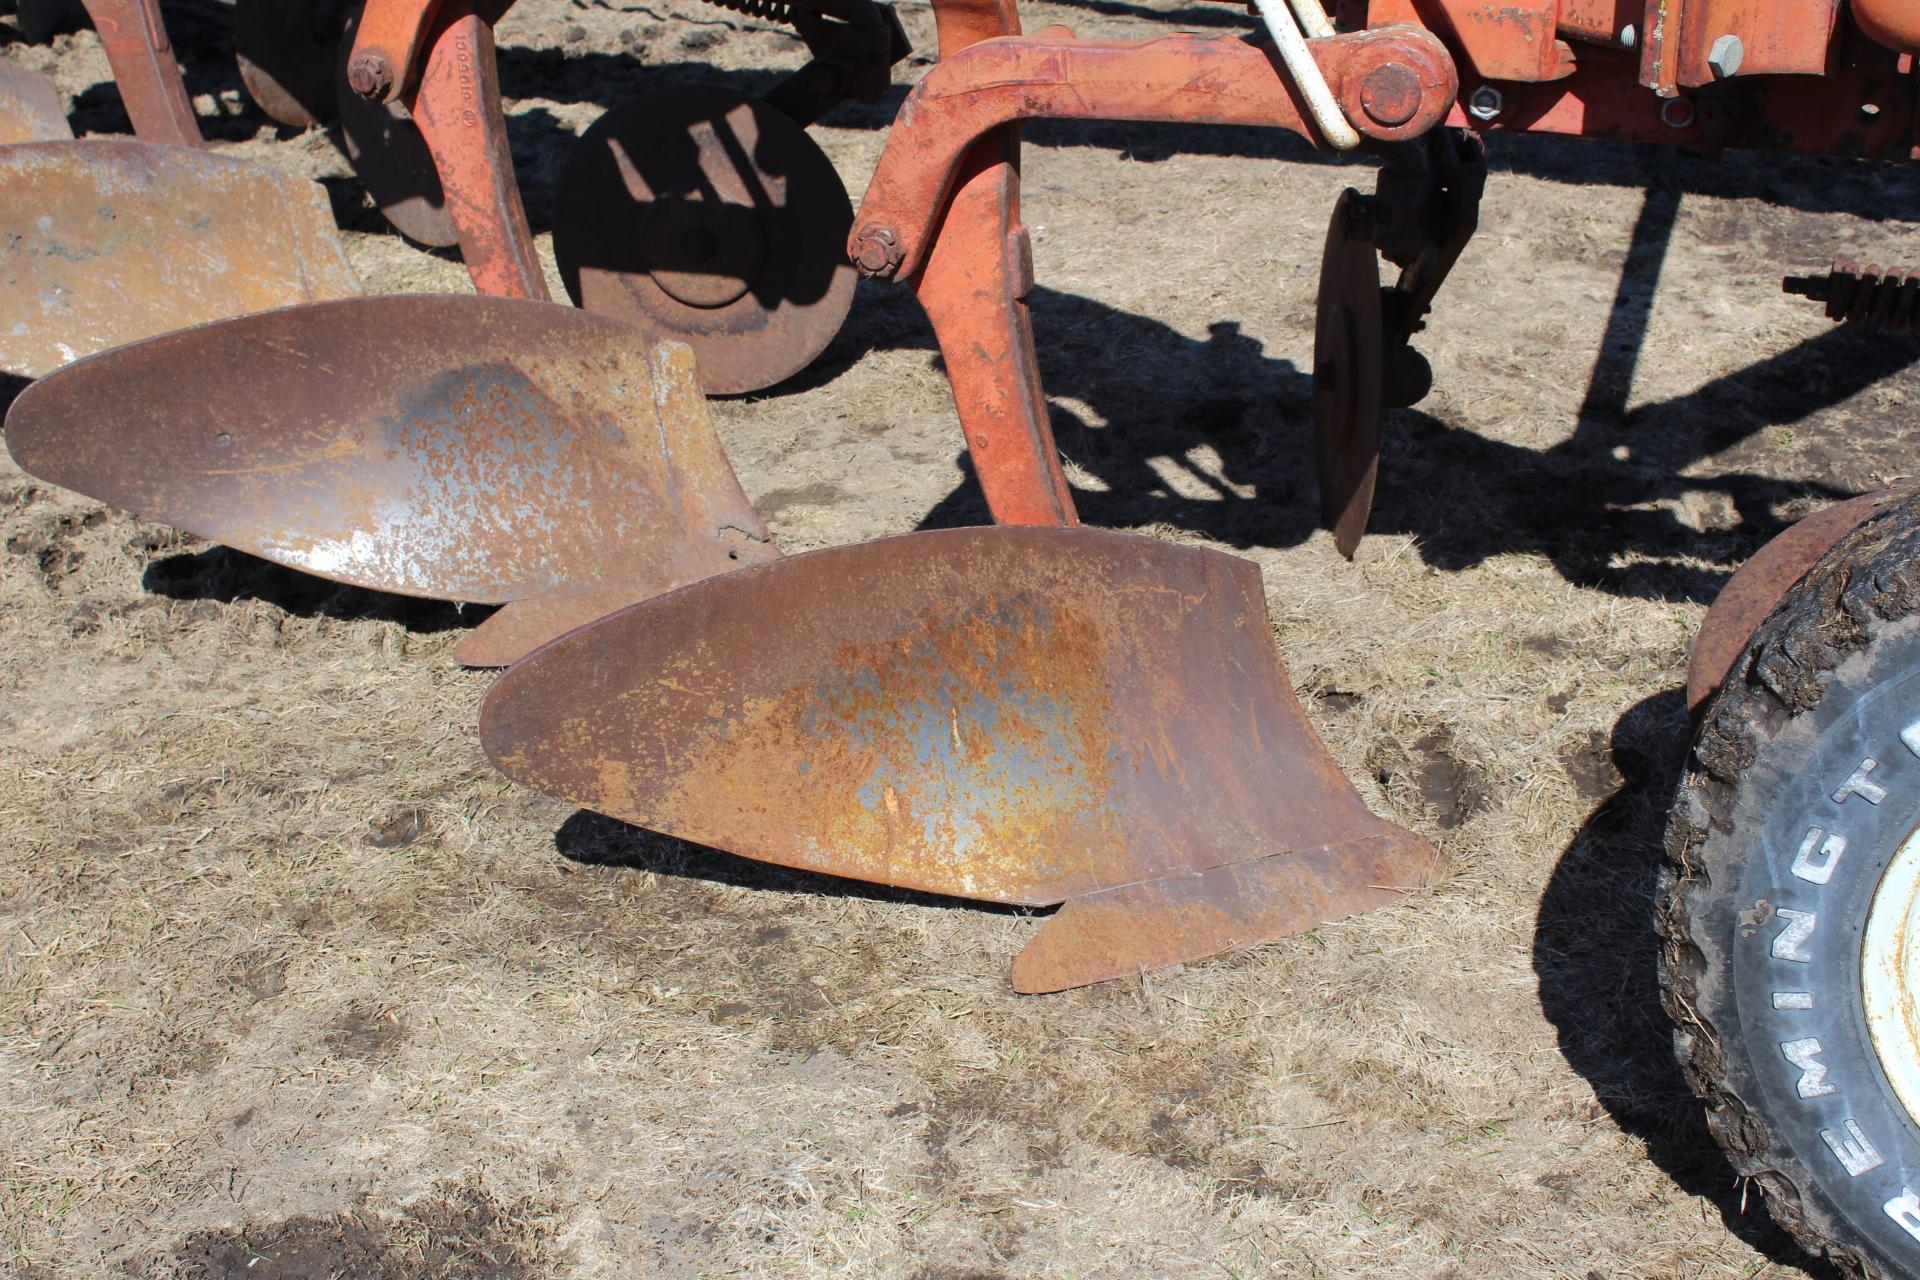 IH 720 7-18" AR PLOW, (7) COULTERS, 2 PT HITCH,